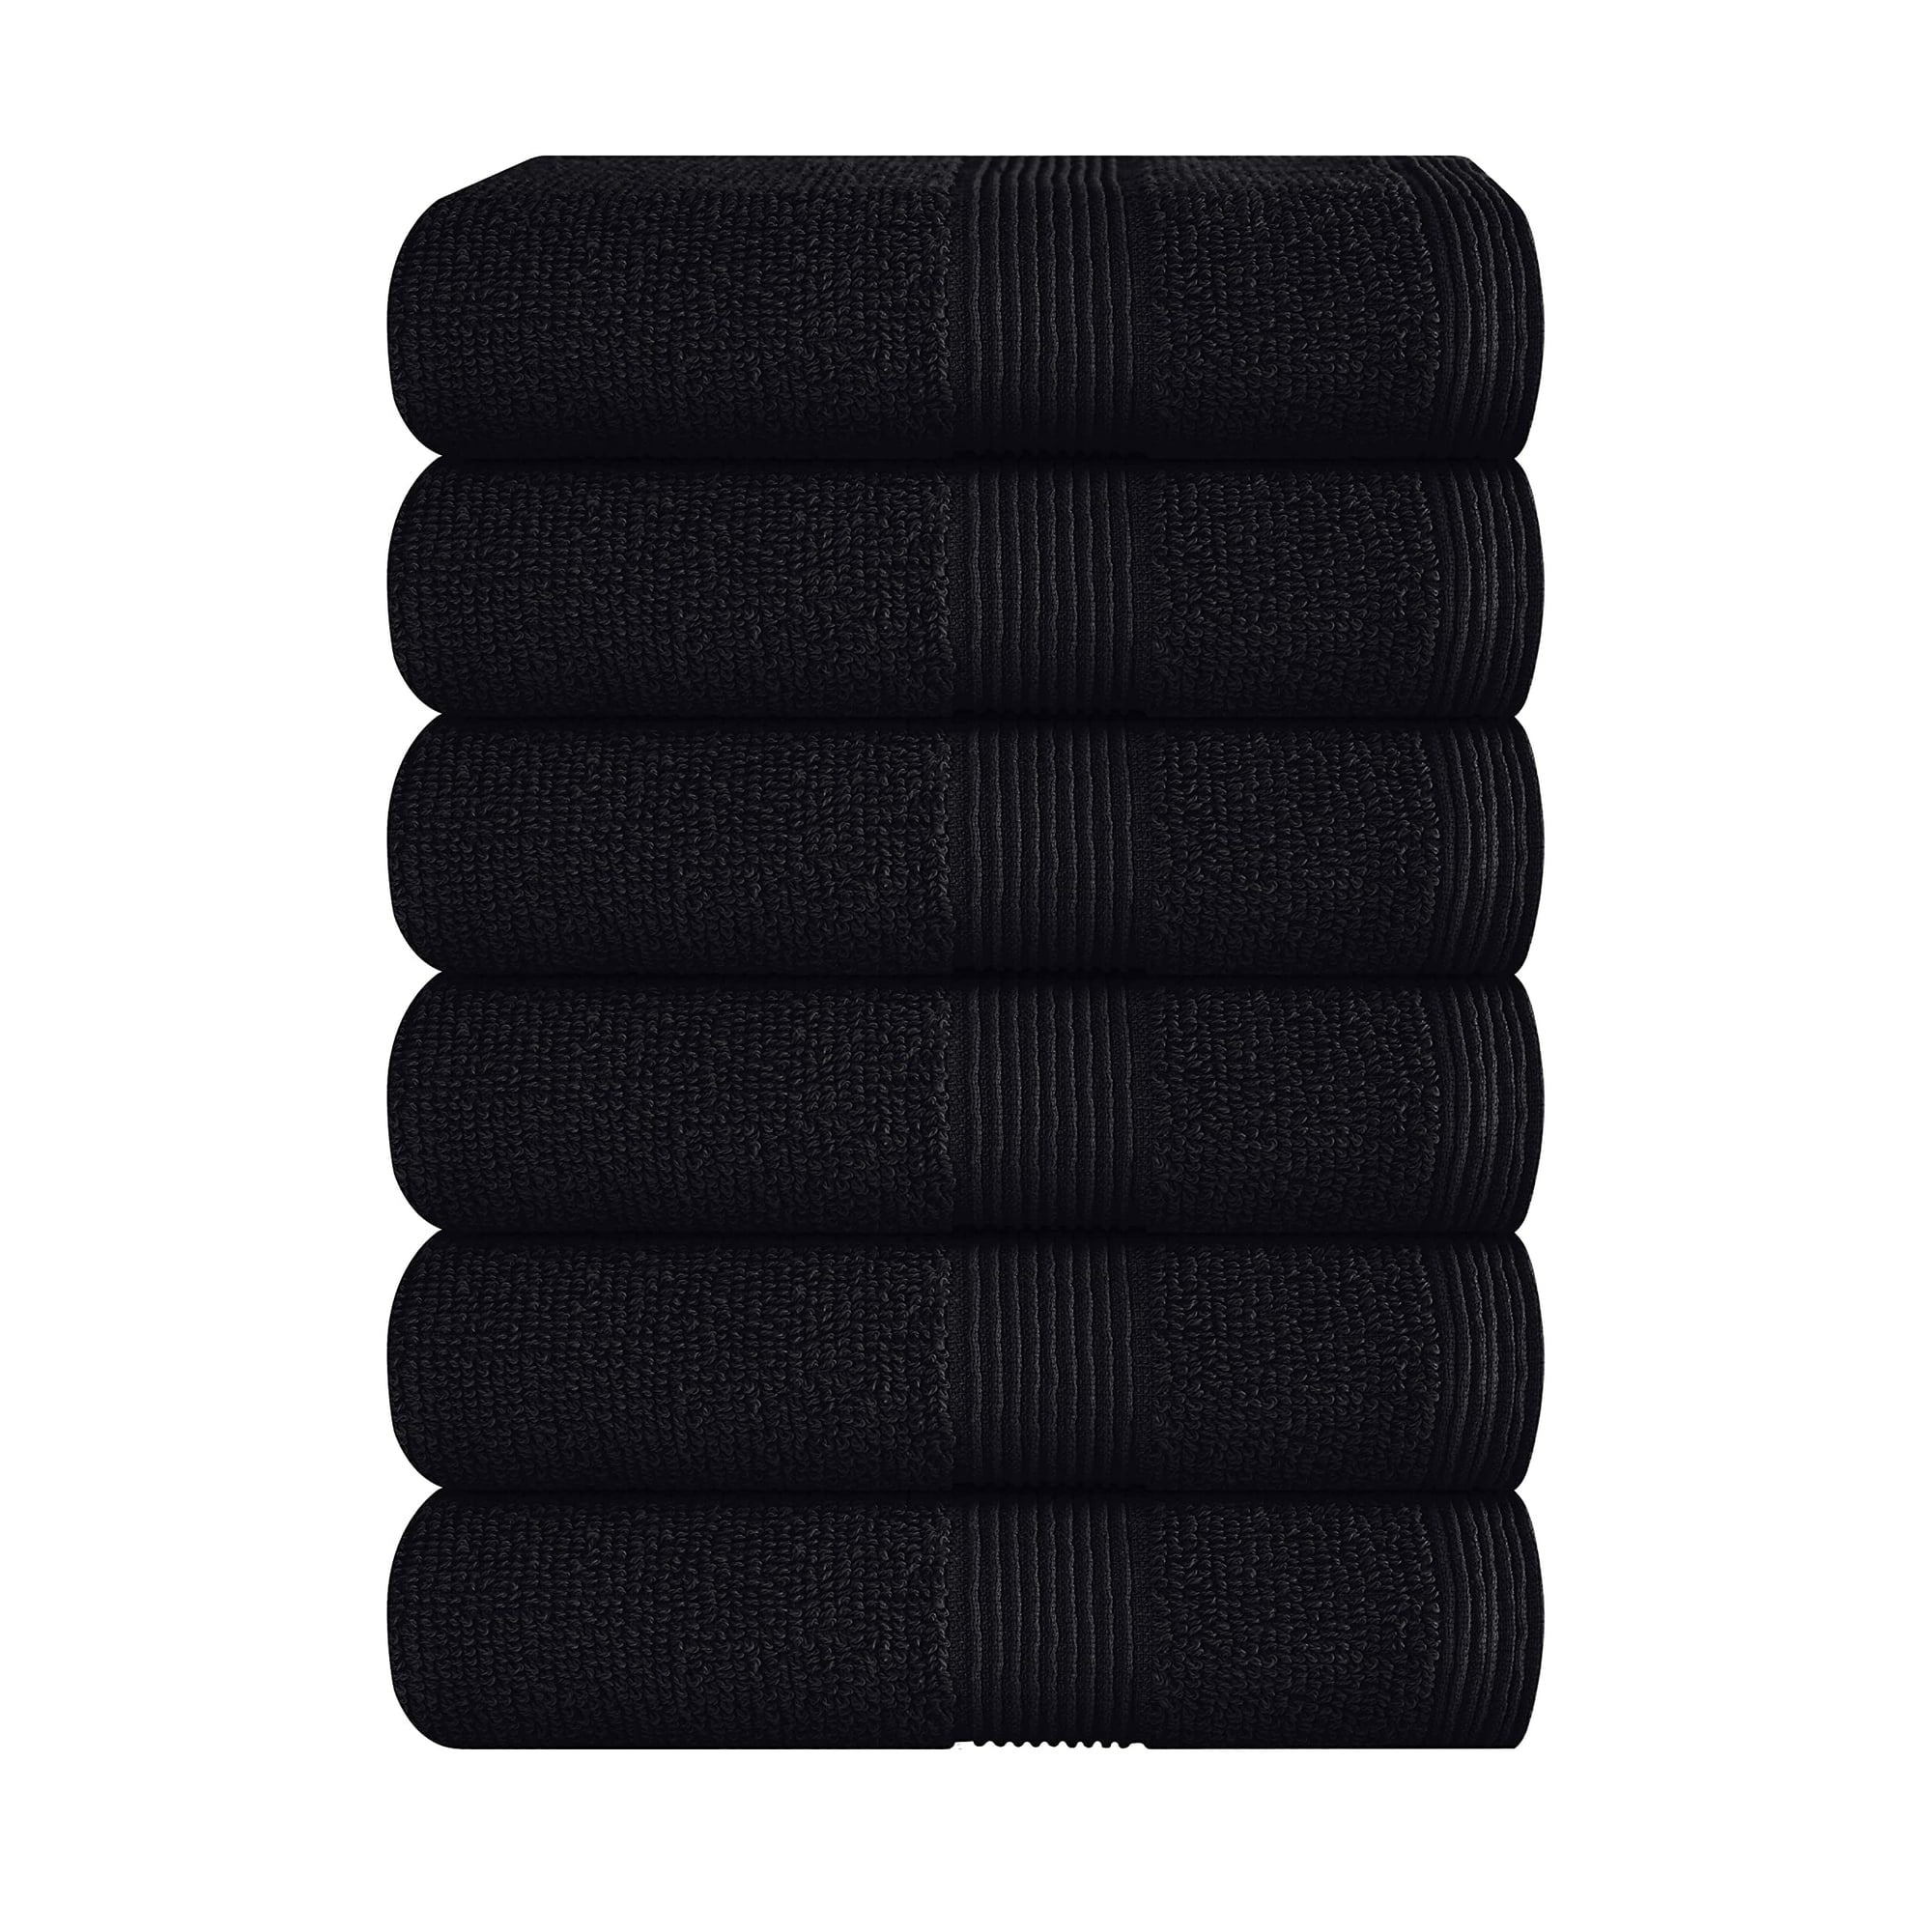 BELIZZI HOME Ultra Soft 6-Piece Hand Towel Set 16x28 - 100% Ringspun Cotton - Durable & Highly Absorbent Hand Towels - Ideal for use in Bathroom, Kitchen, Gym, Spa & General Cleaning - Black